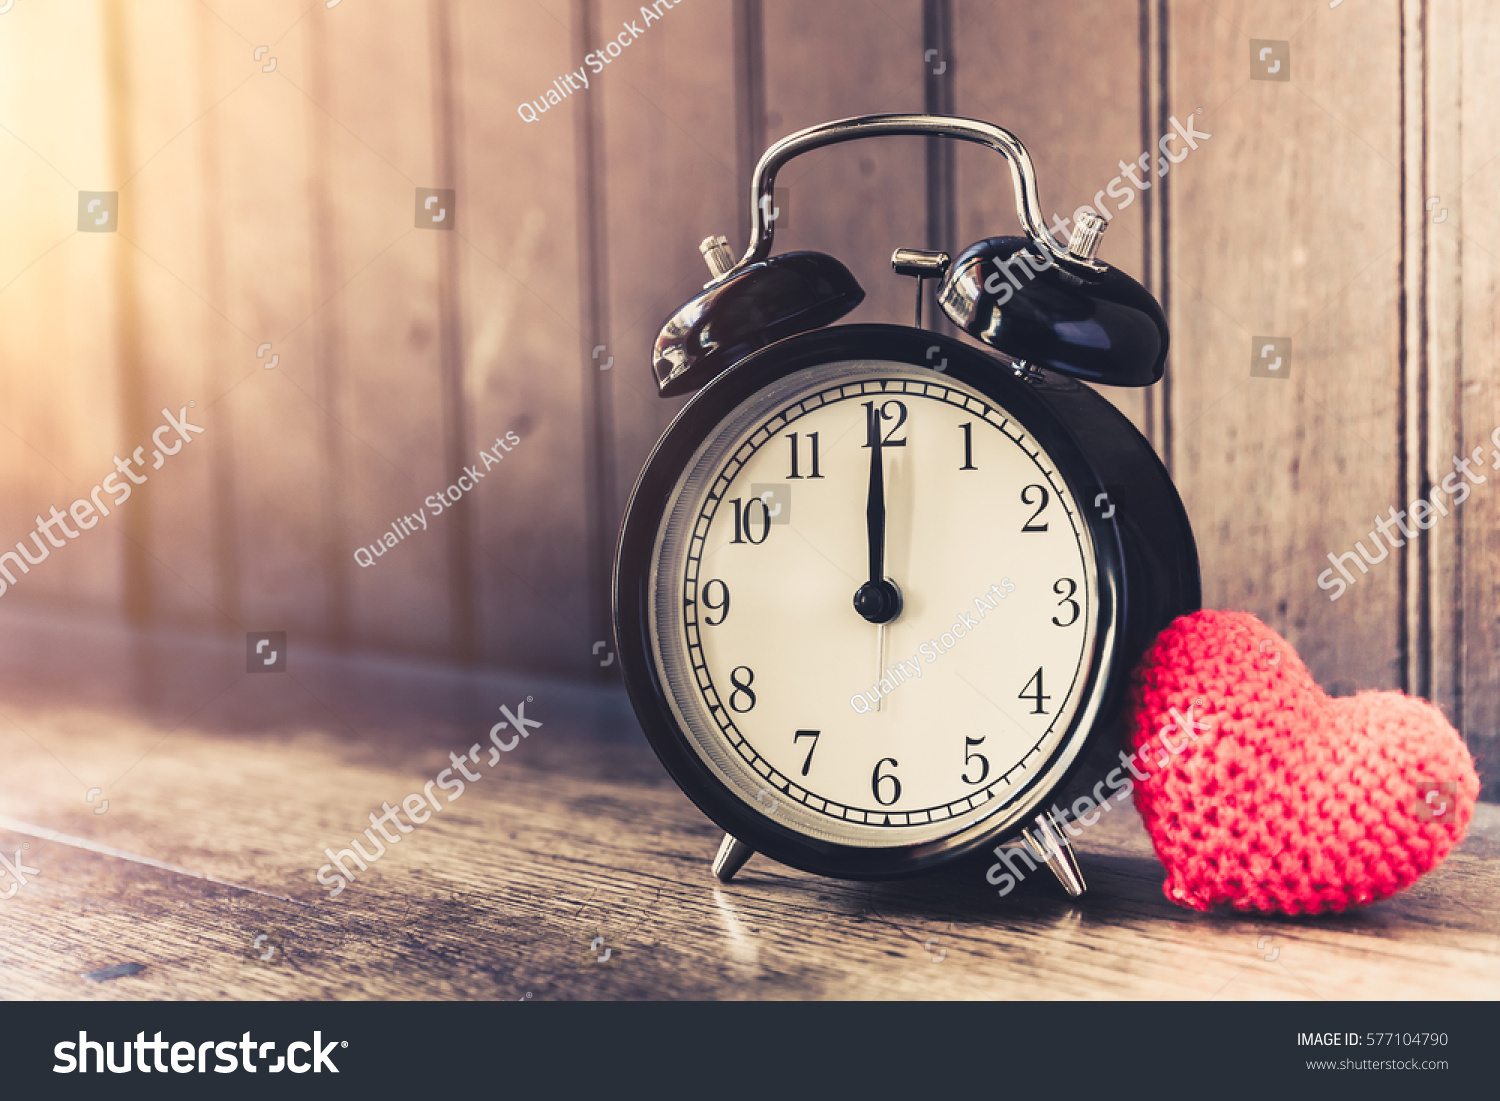 Love clock vintage tone timed 12 o'clock, Time of sweet loving past memories story on the old wood background. #577104790